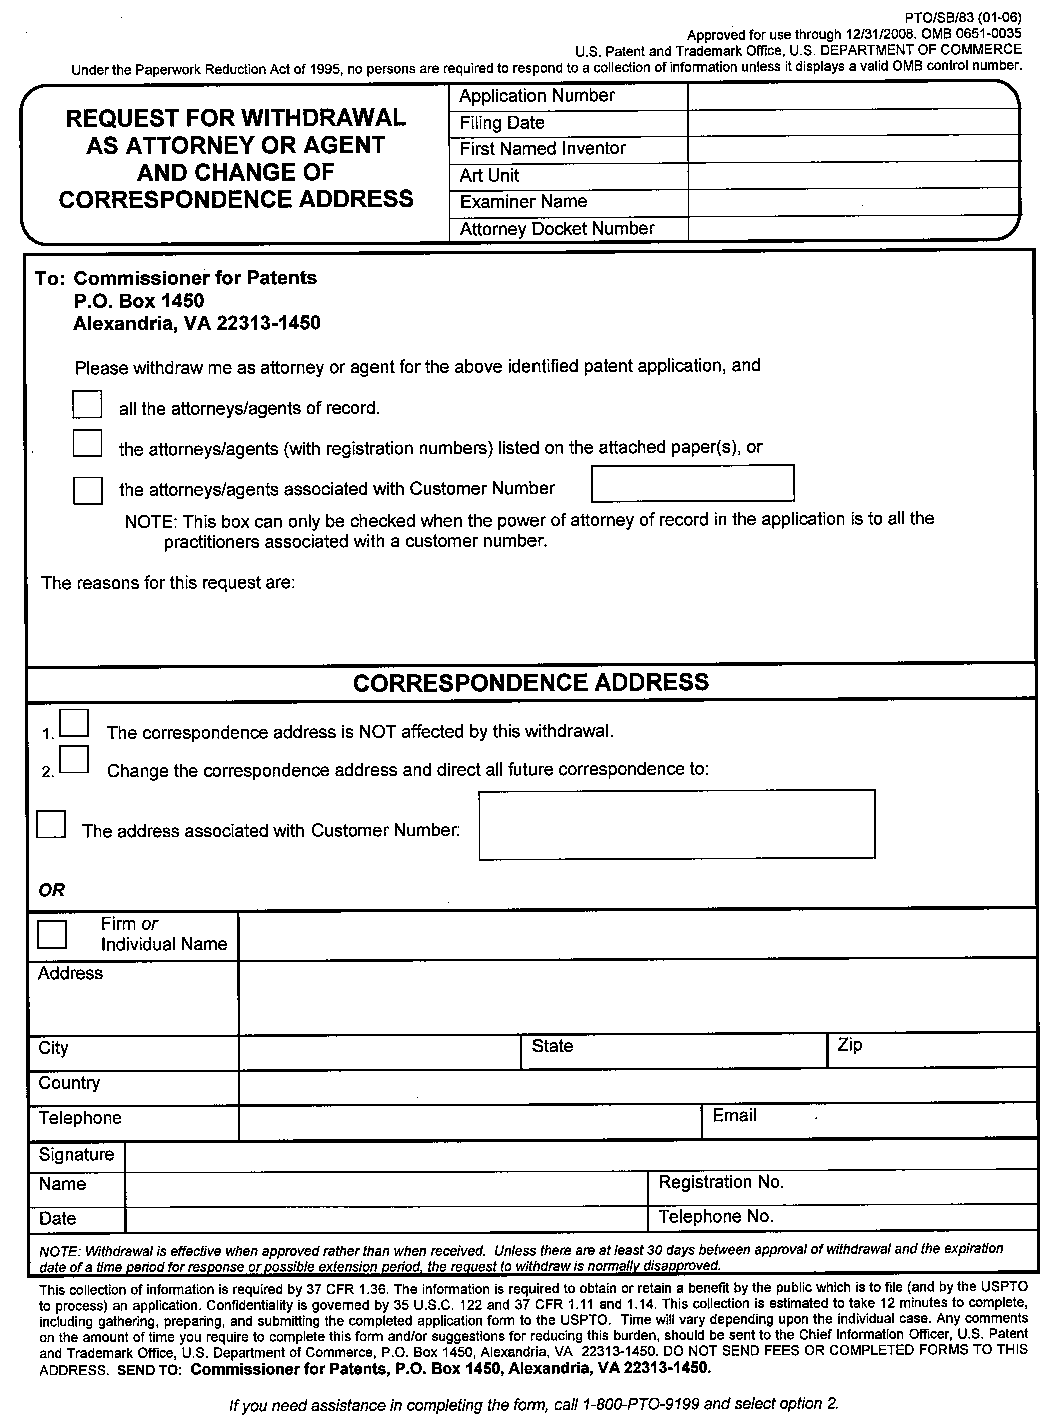 form pto/sb/83. request for withdrawal as attorney or agent and change of correspondence address